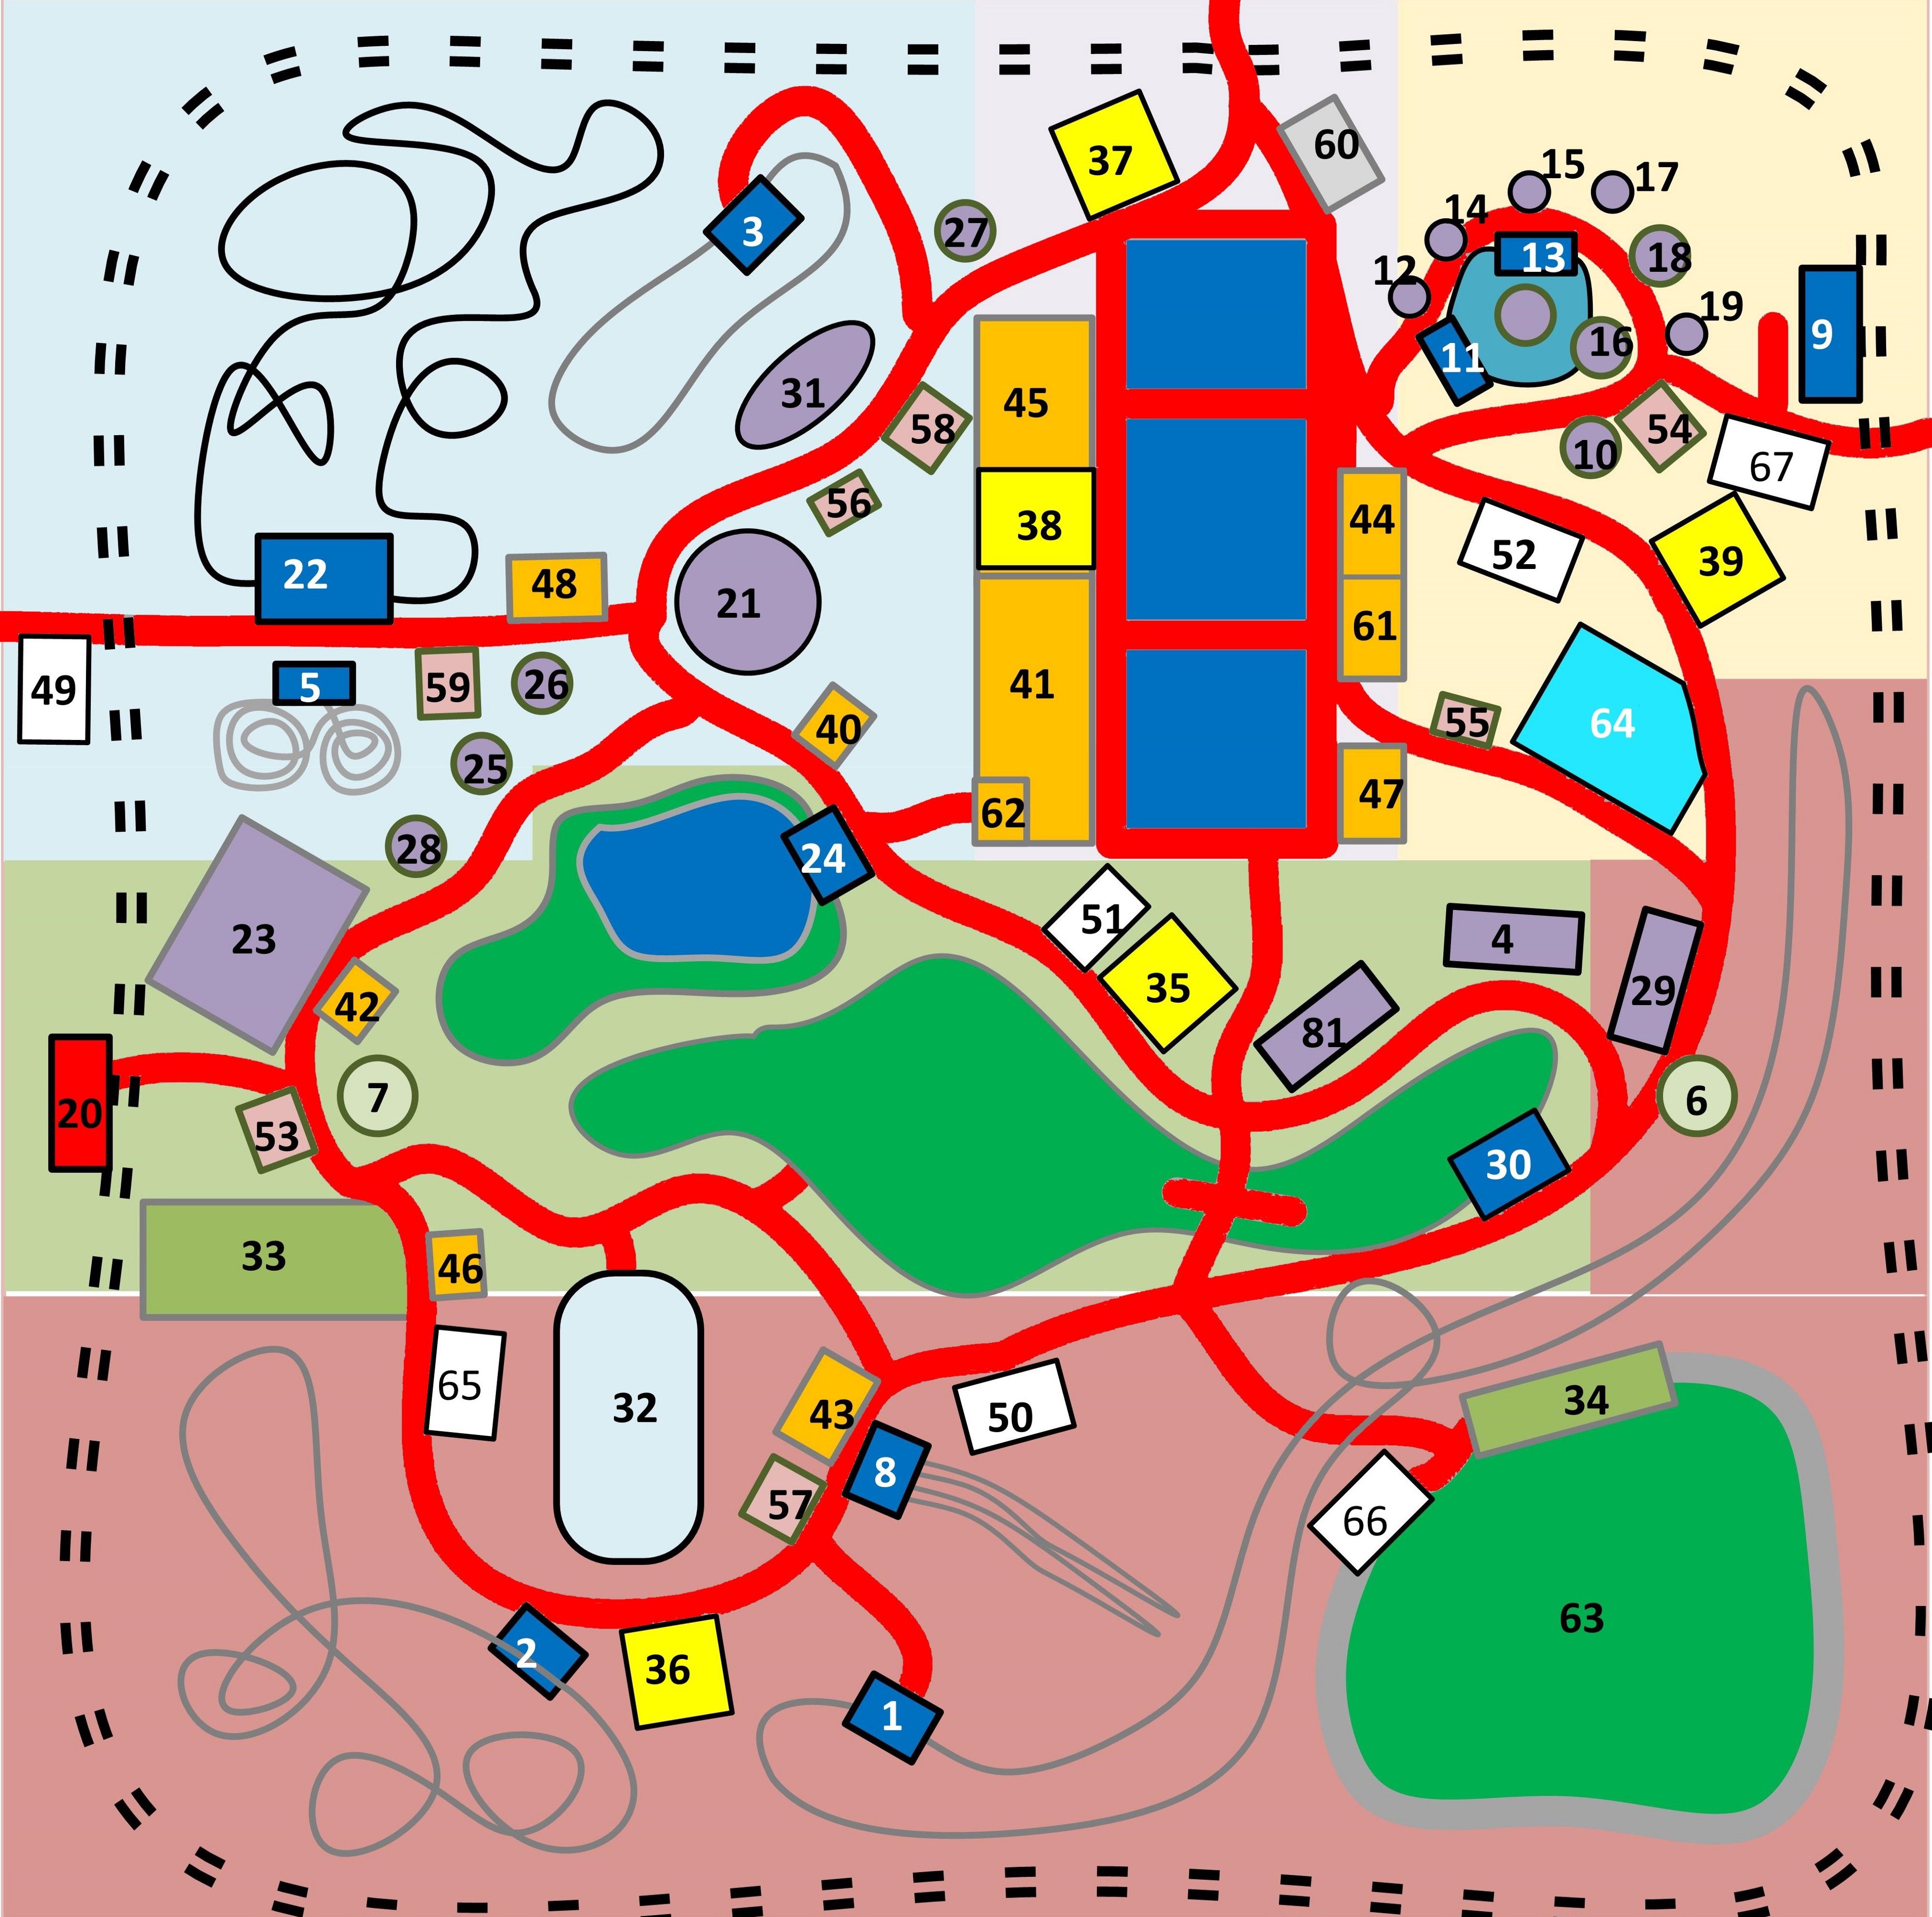 The (simulated) theme park. Check-in locations are marked by numbers.